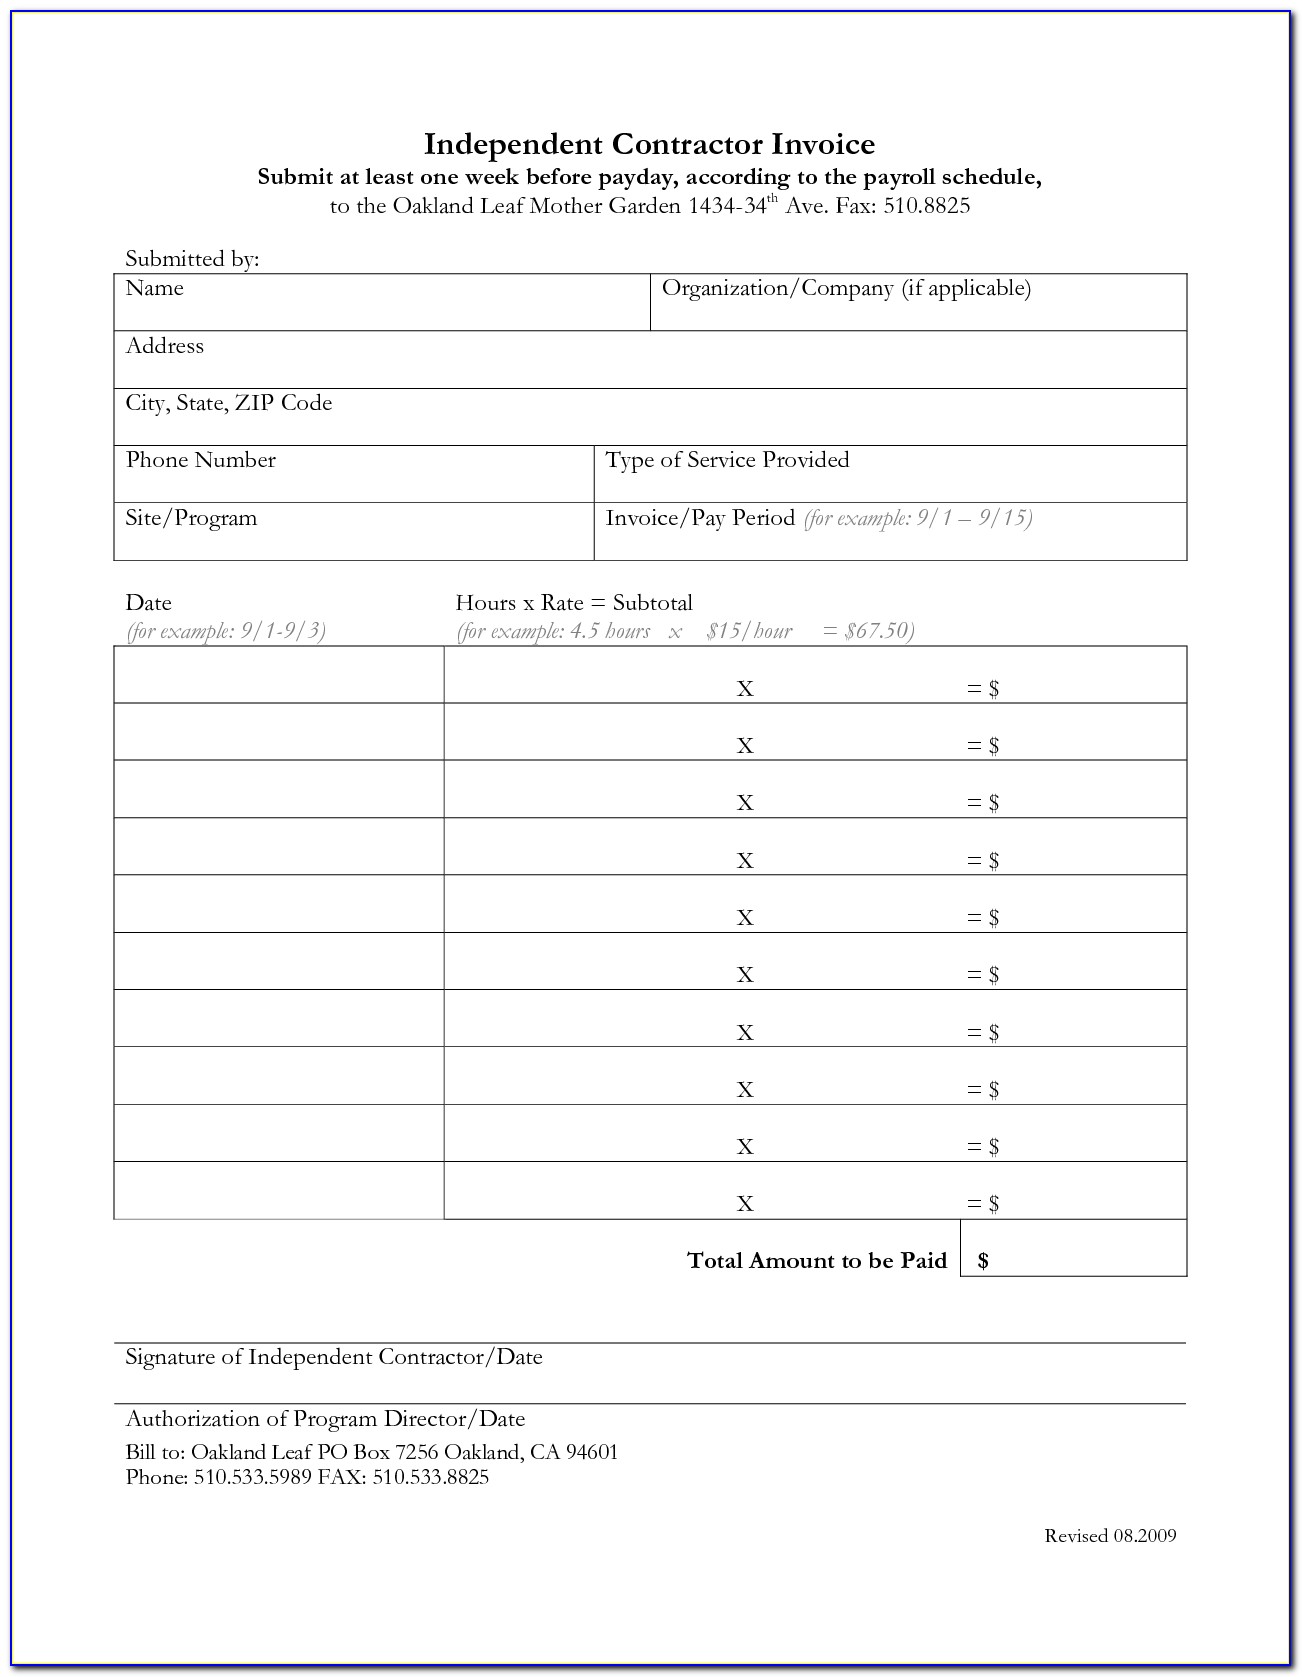 Independent Contractor Billing Invoice Template